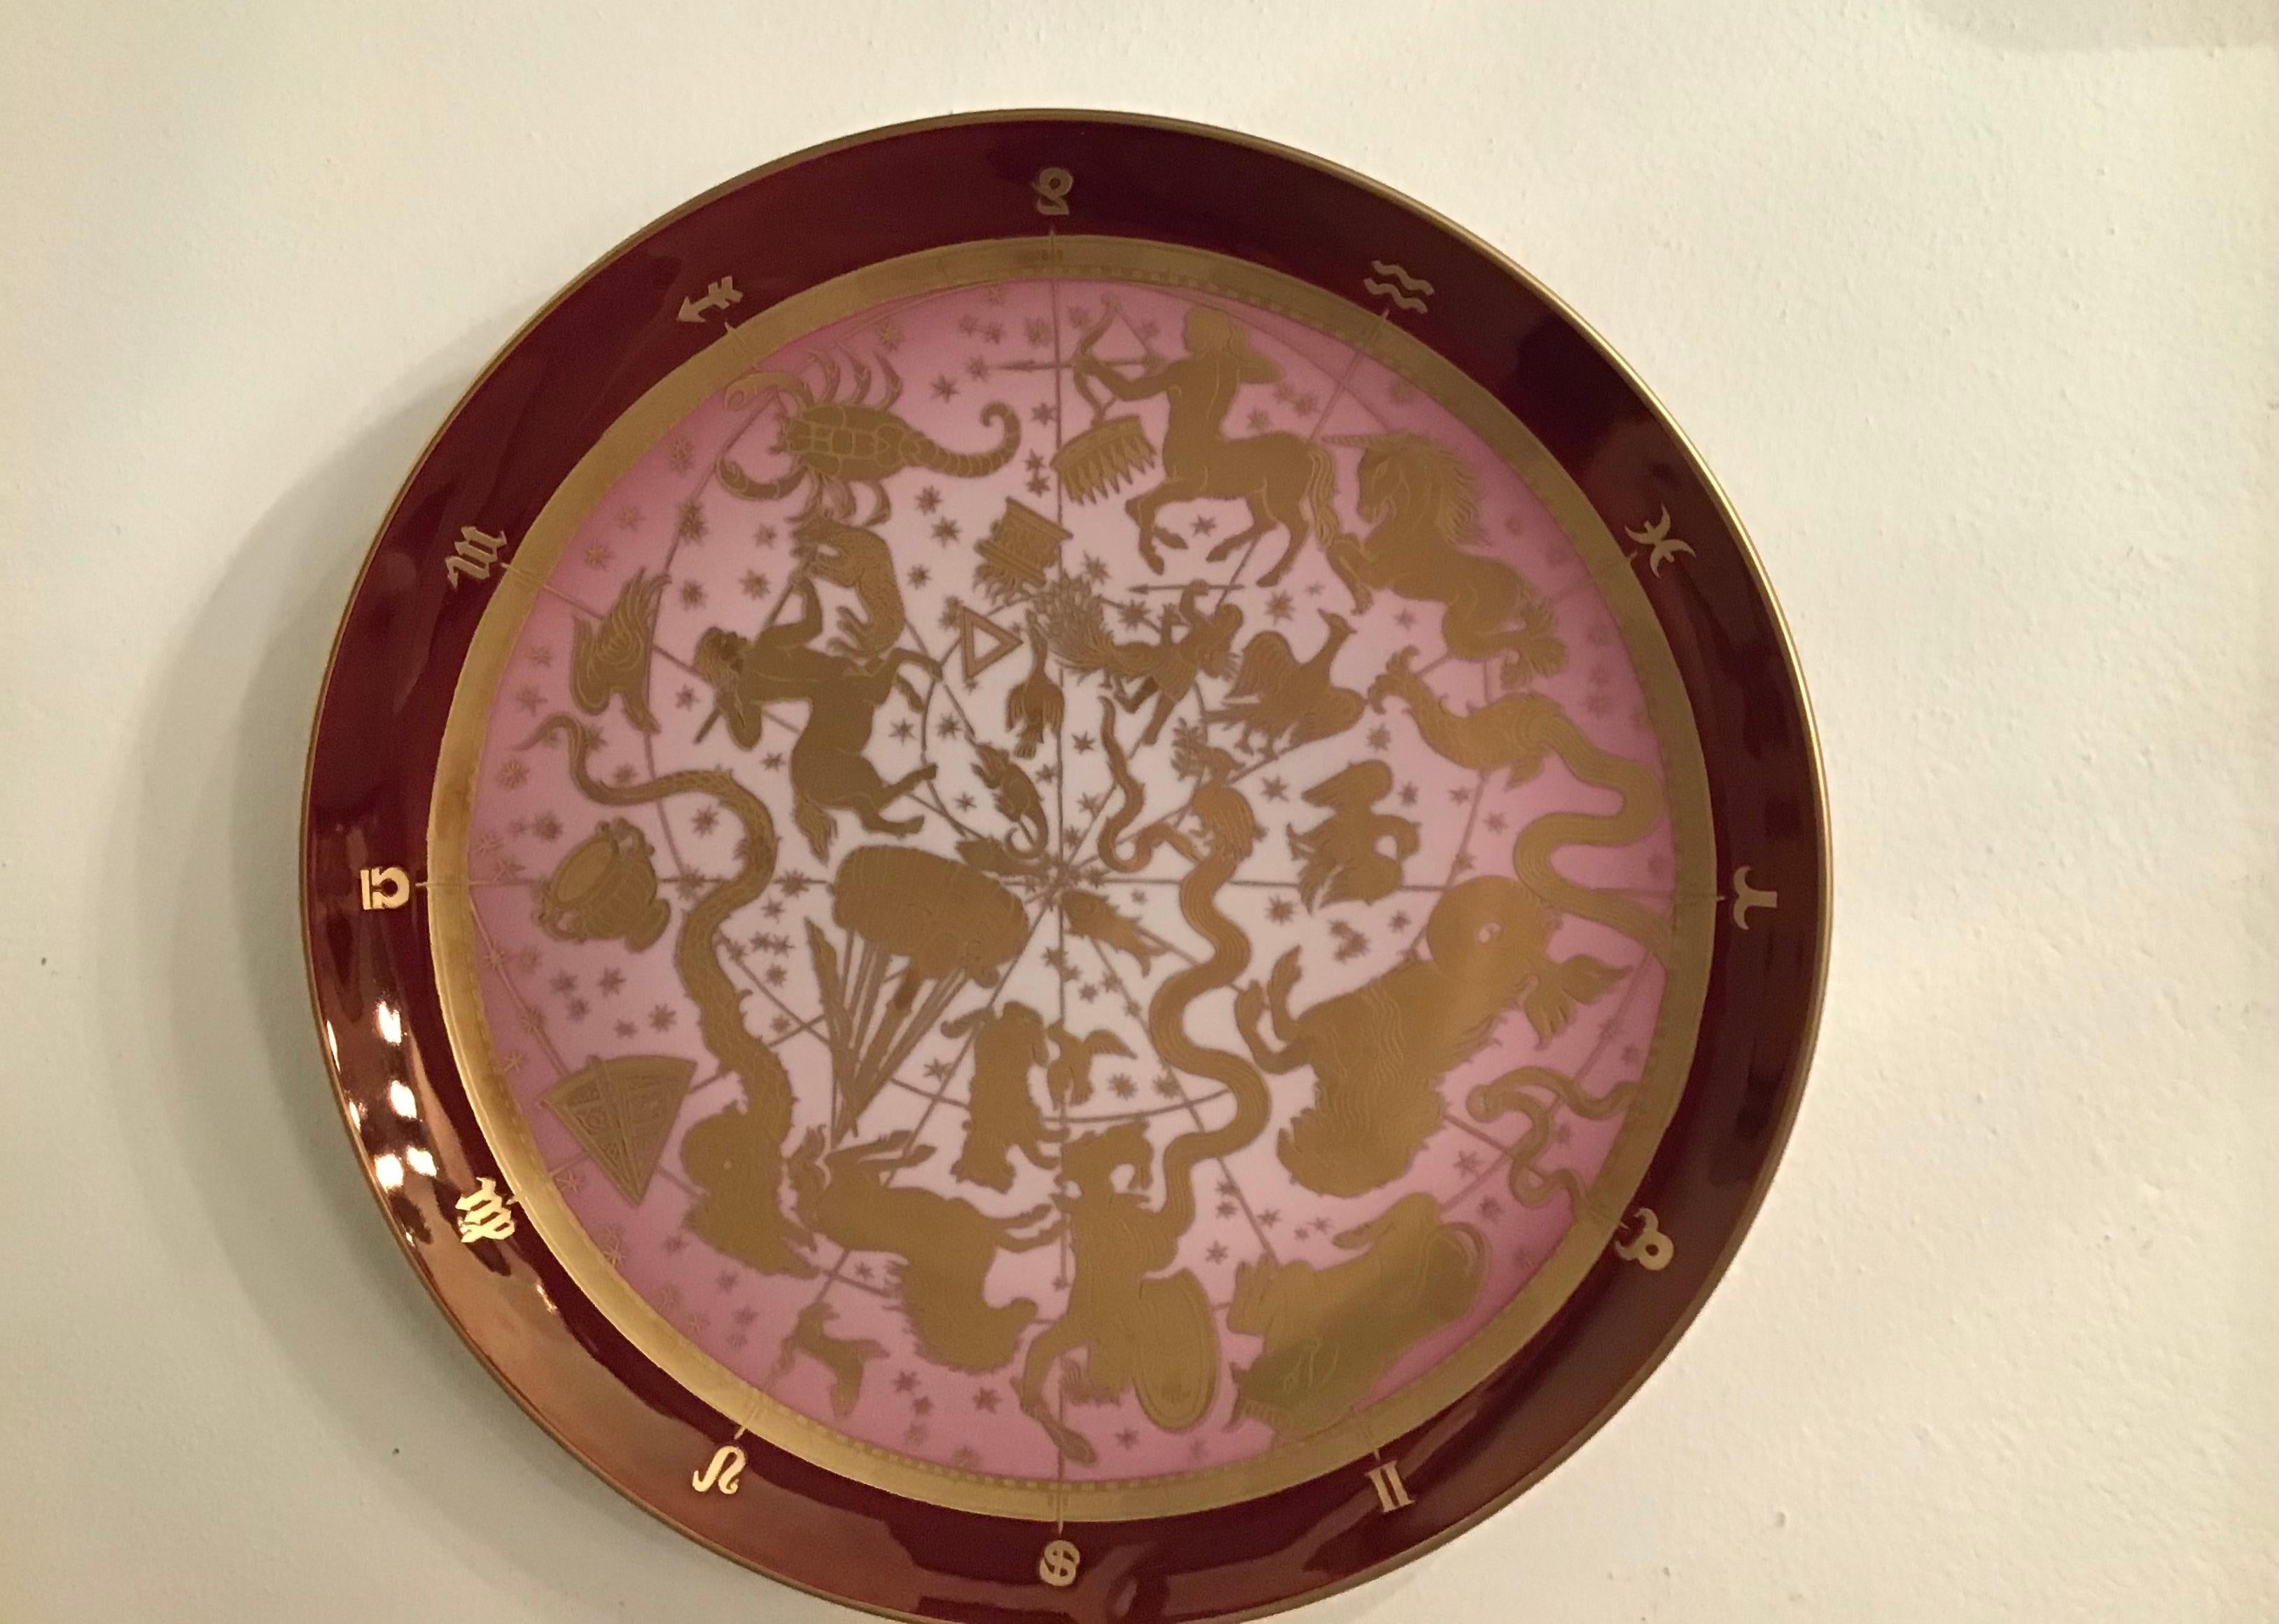 Italian Morbelli Porcelain Wall Plate “Planisfero Celeste“ Worked with Pure Gold 1960 IT For Sale